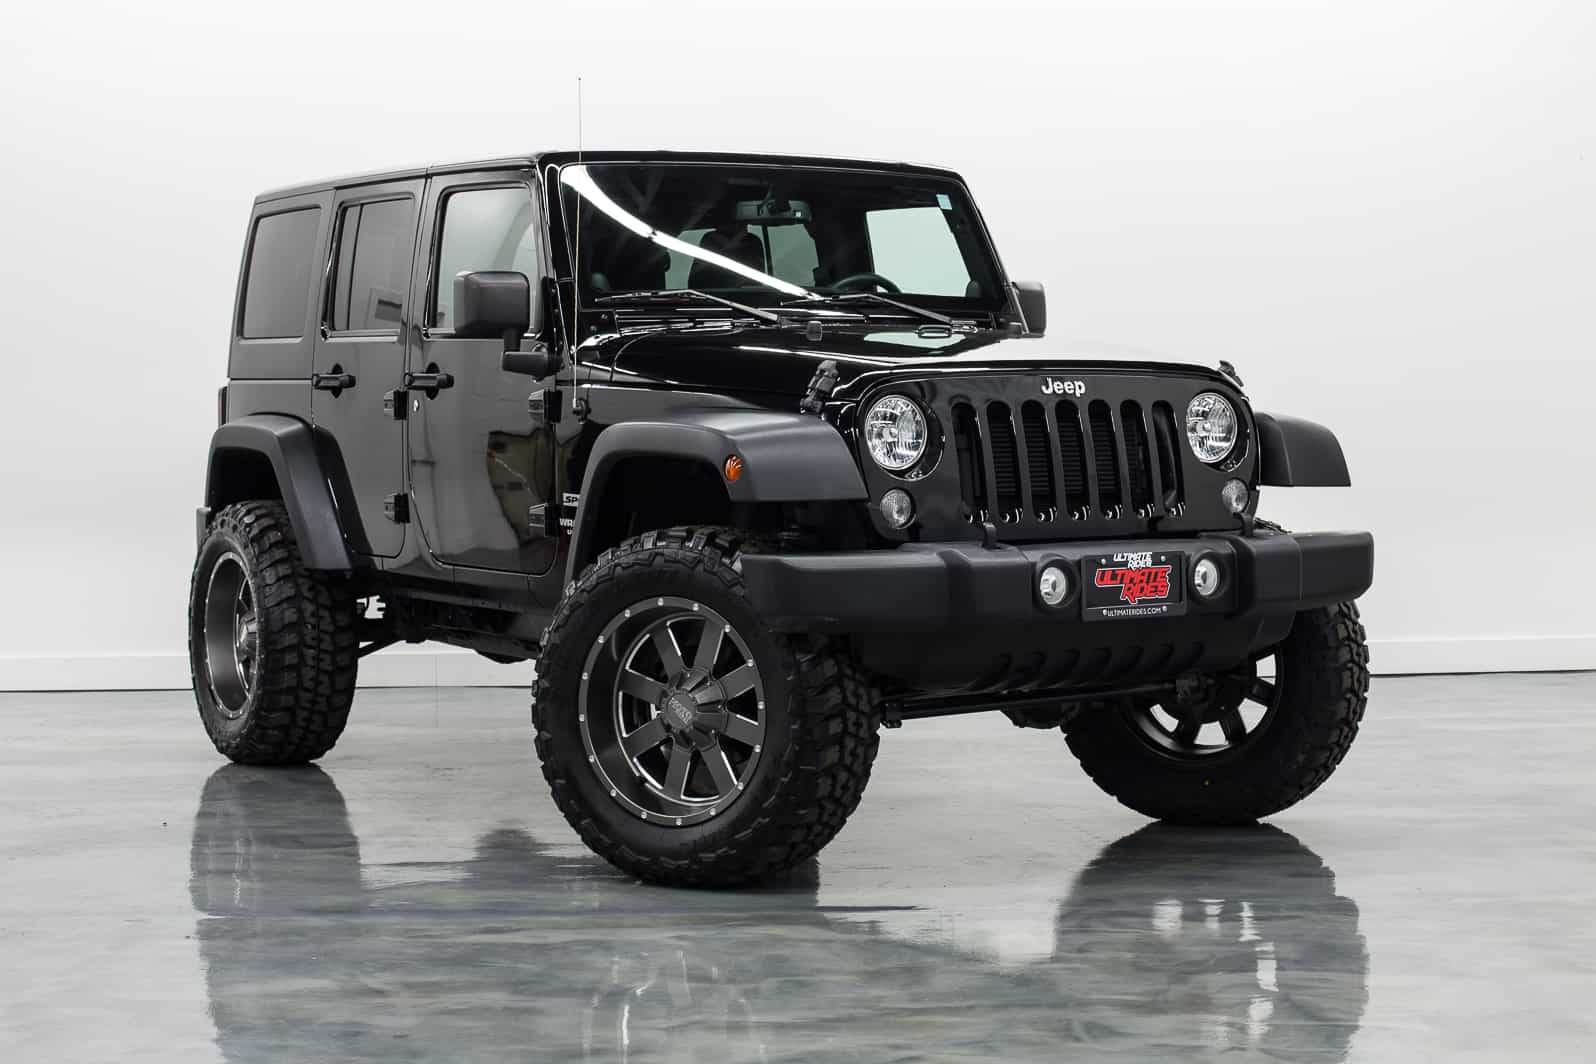 Cool Jeep Wrangler Mods: All The Facts | Ultimate Rides